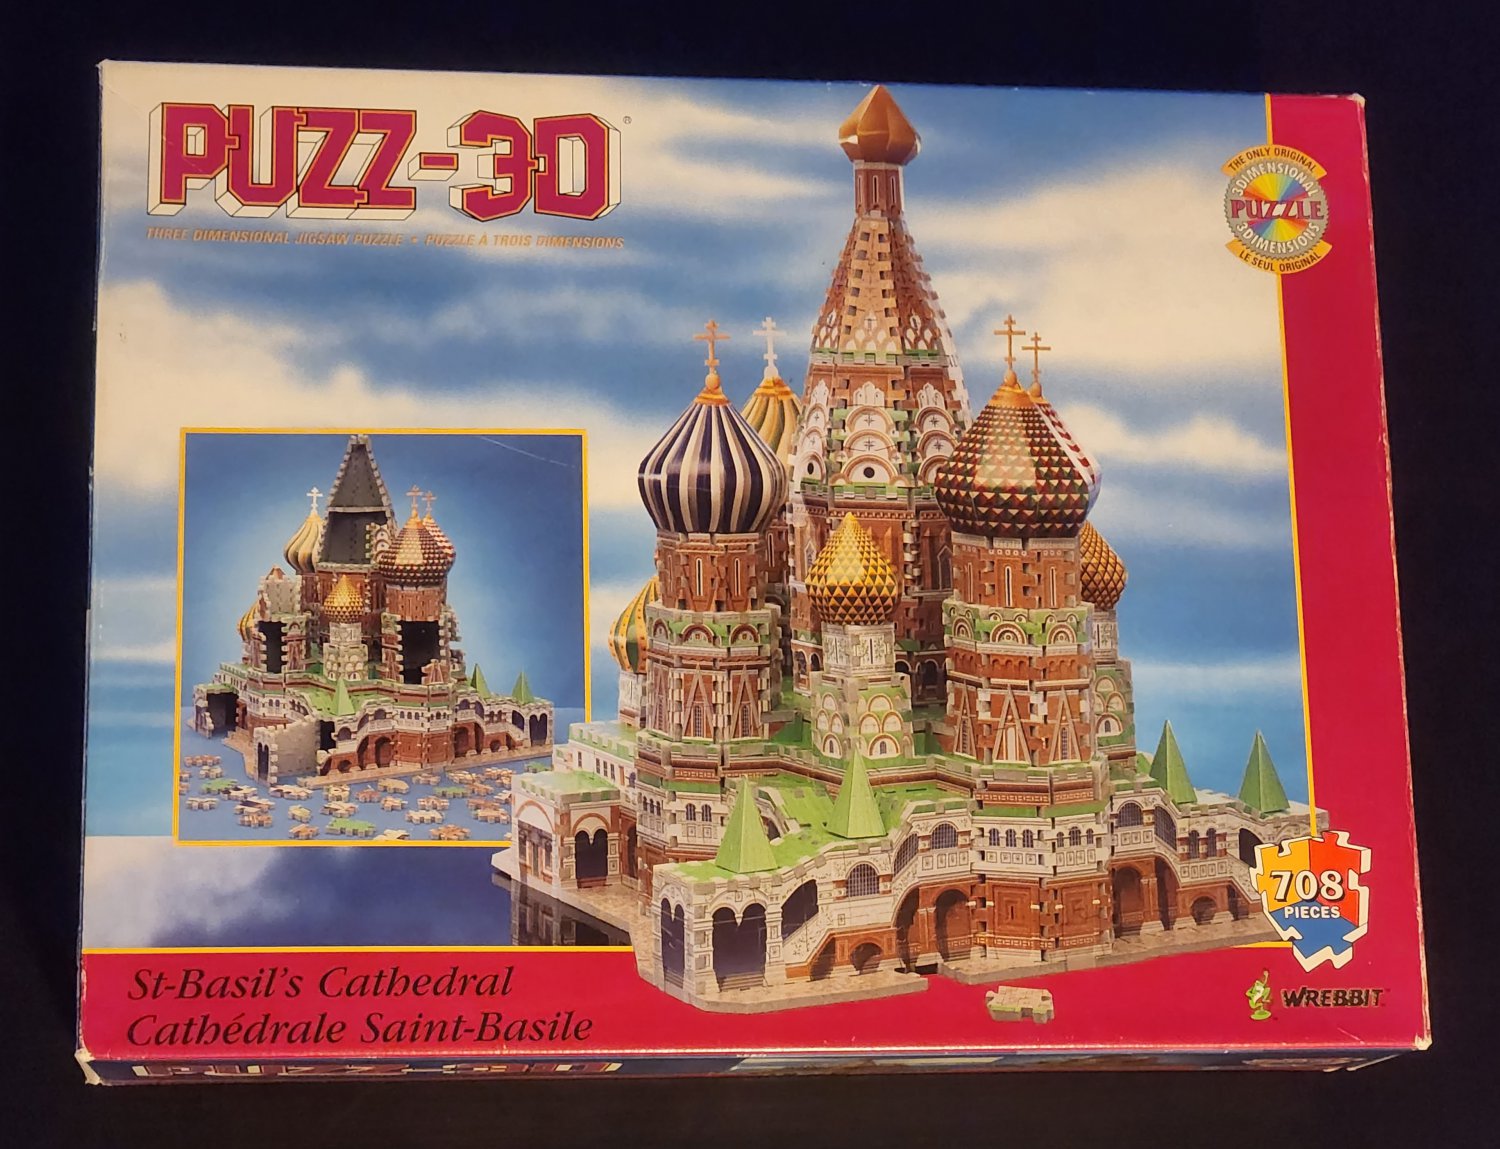 Puzz3D Puzz-3D St-Basil's Cathedral Jigsaw Puzzle 708 Pieces P3D-809 Moscow Wrebbit 2005